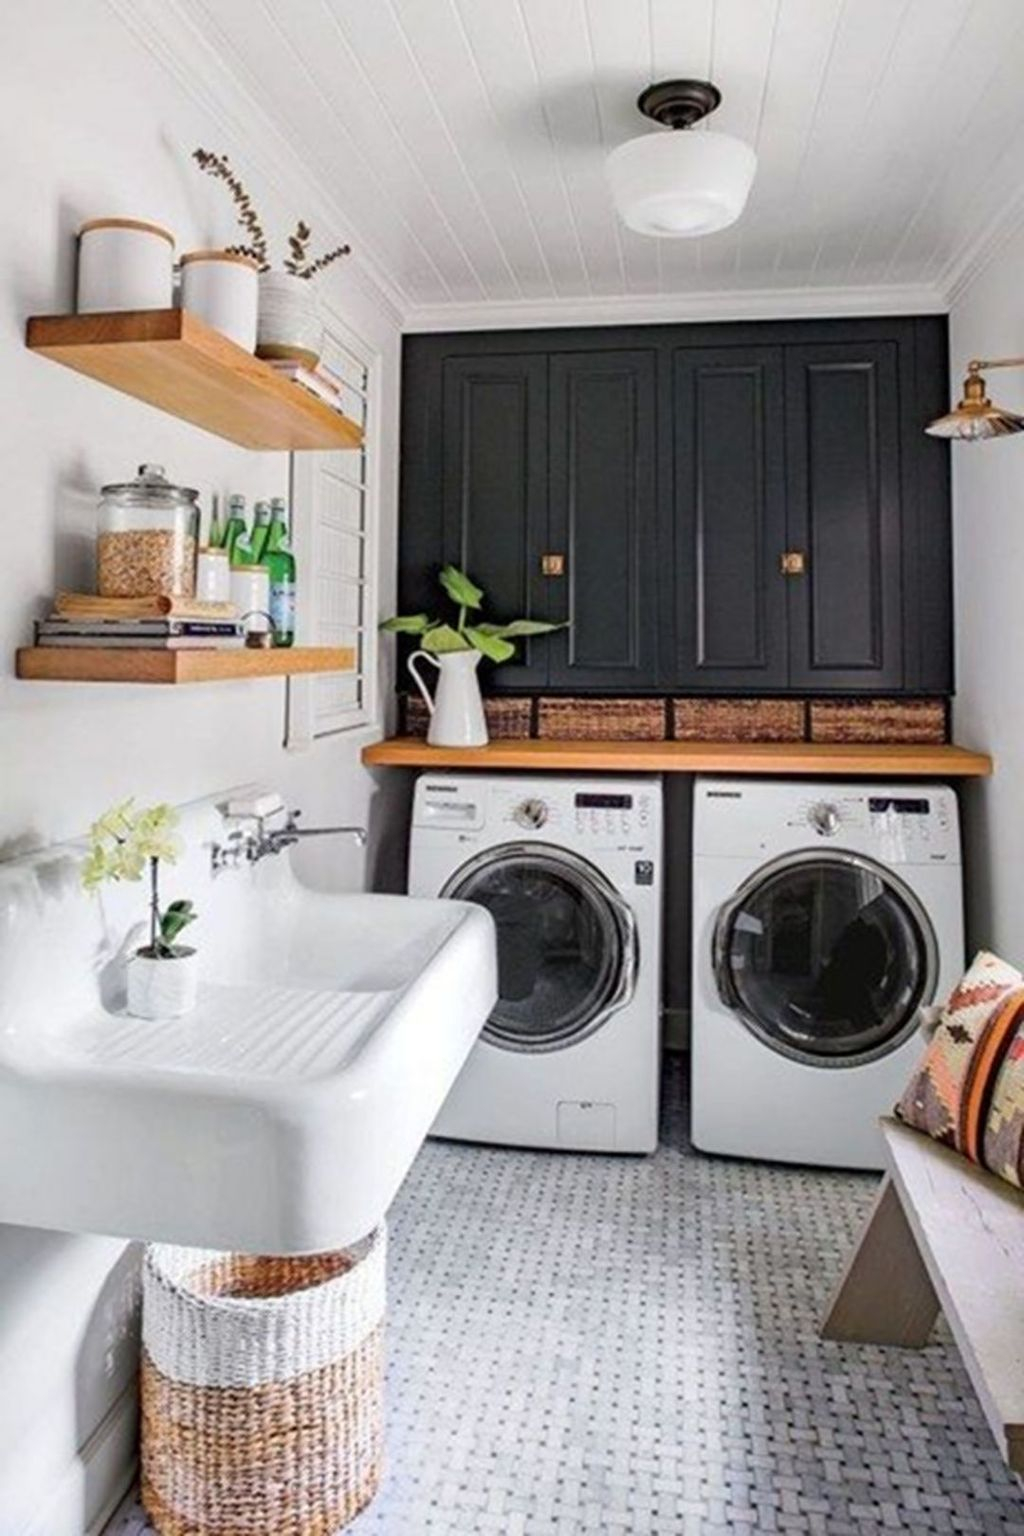 Favored Laundry Room Organization Ideas To Try 04